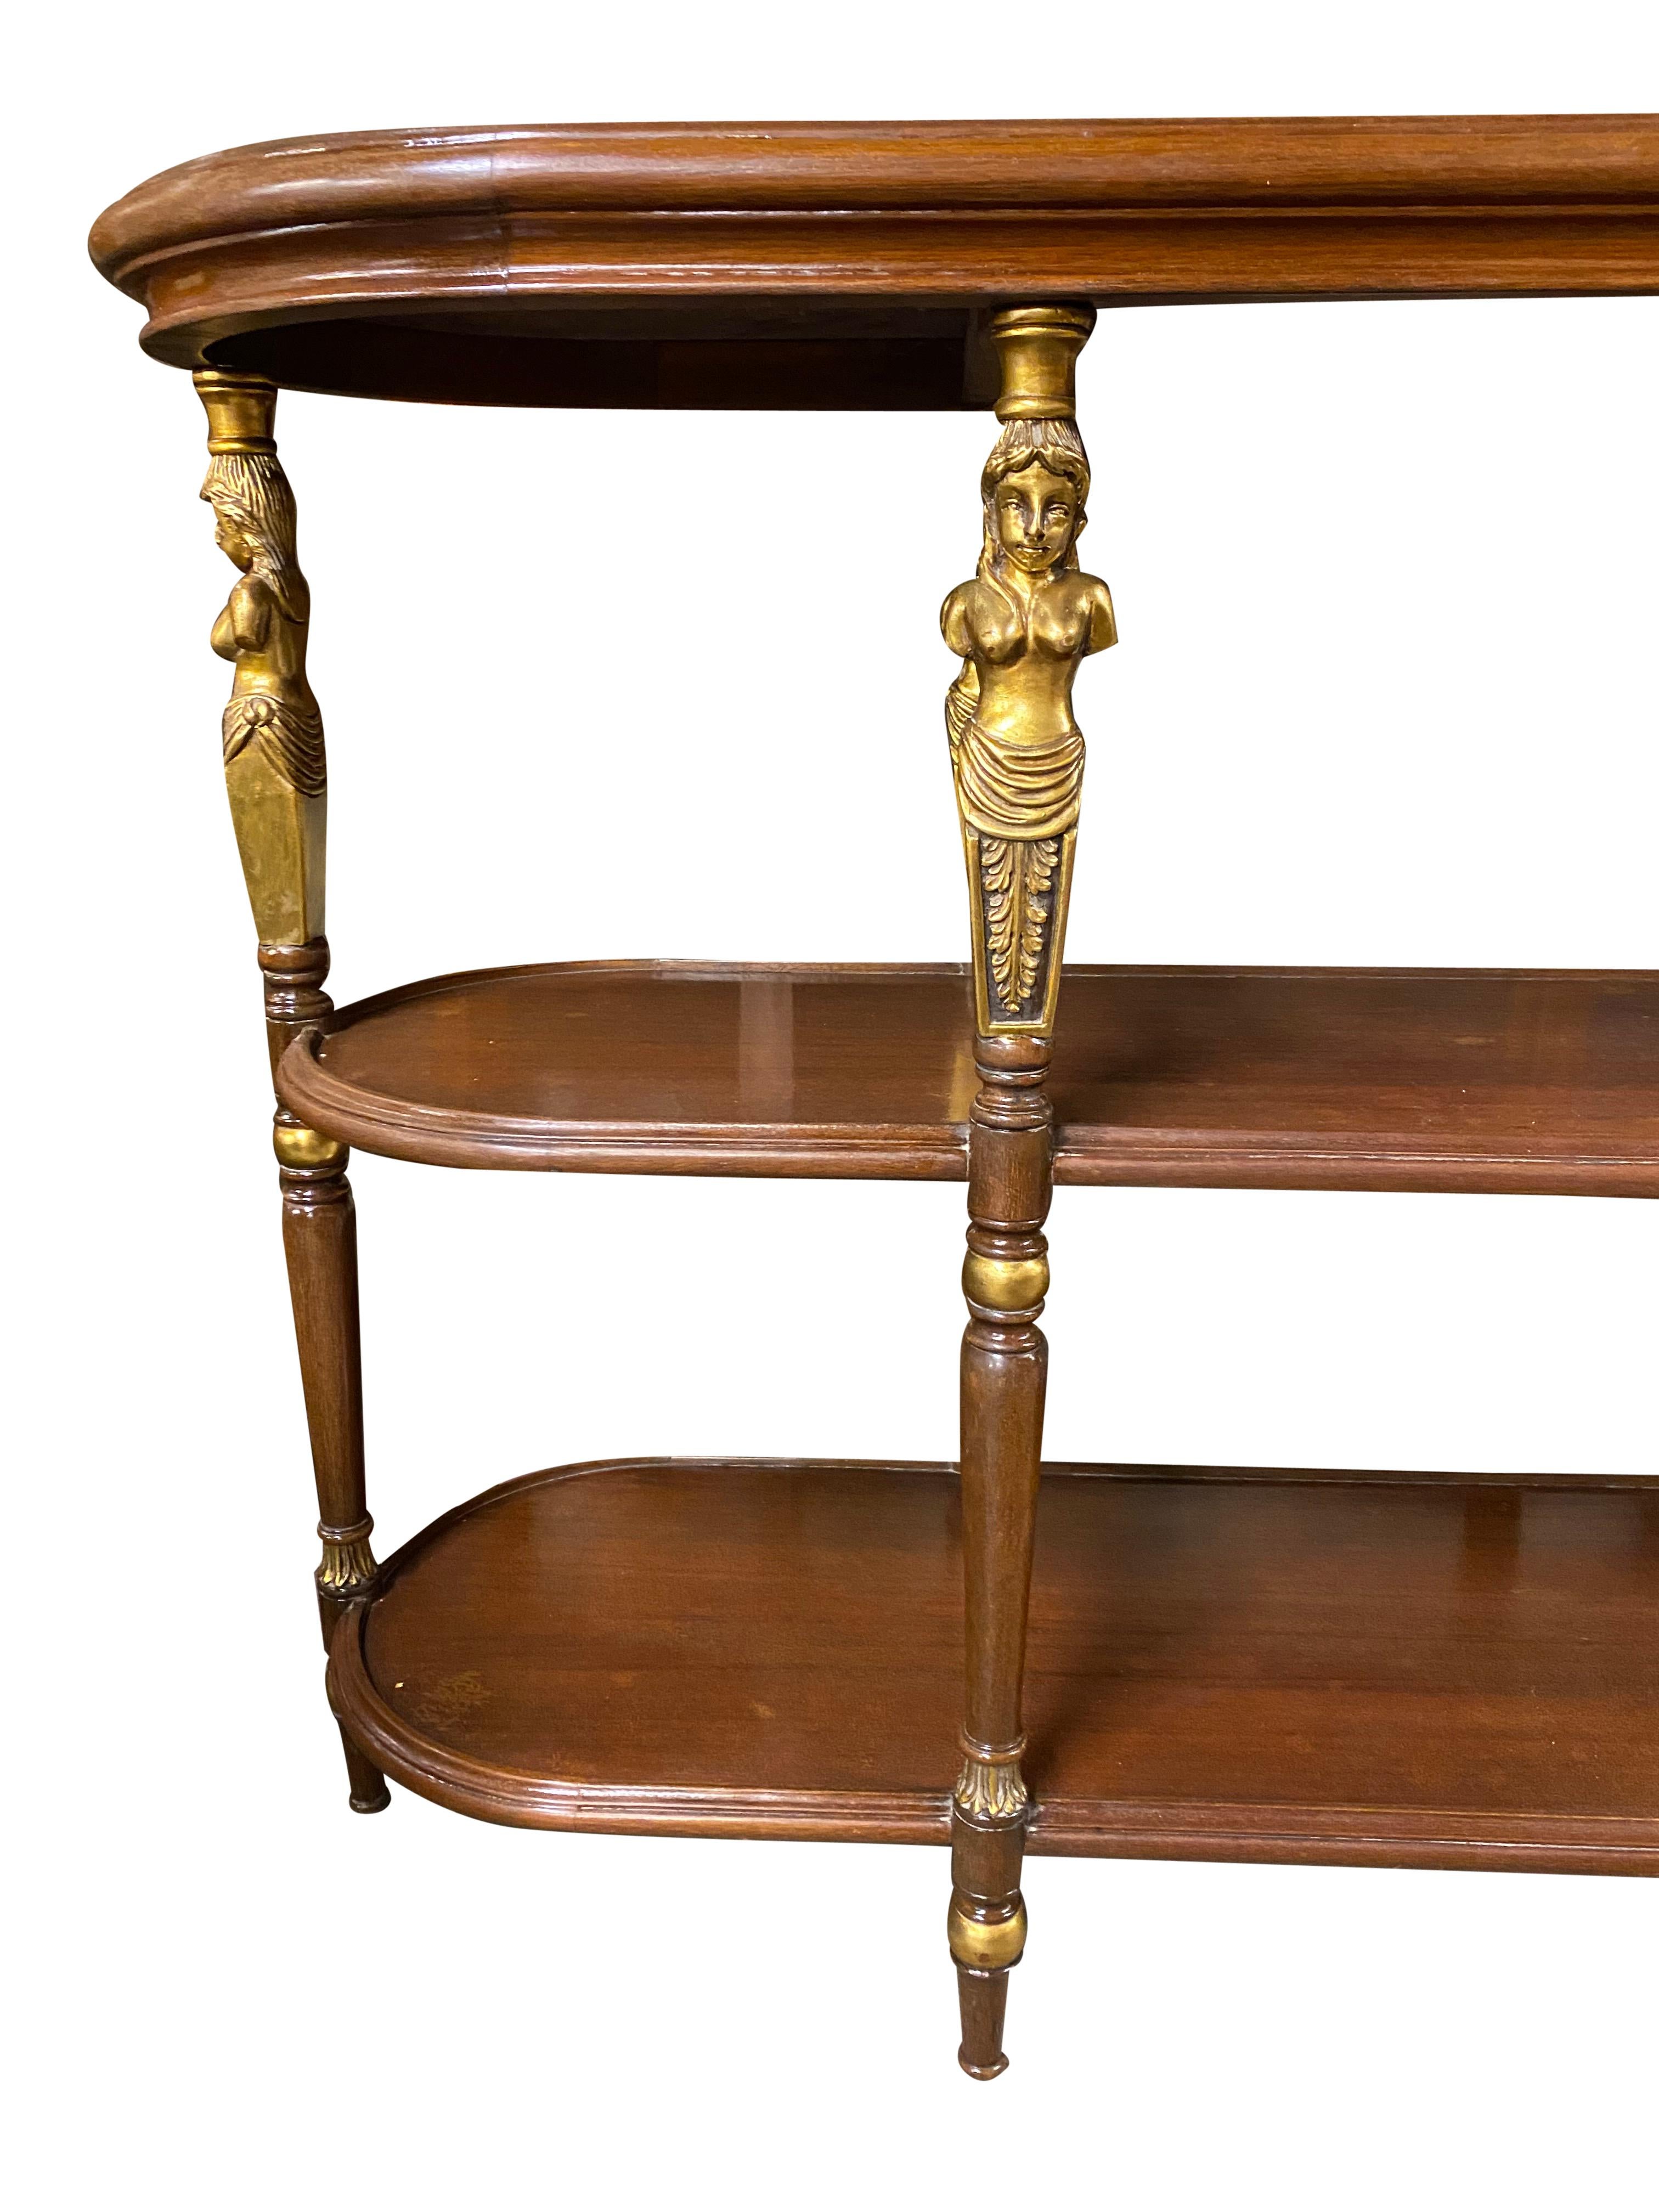 20th Century French Empire Style Open Bookcase/Etagere Tiered Table For Sale 4